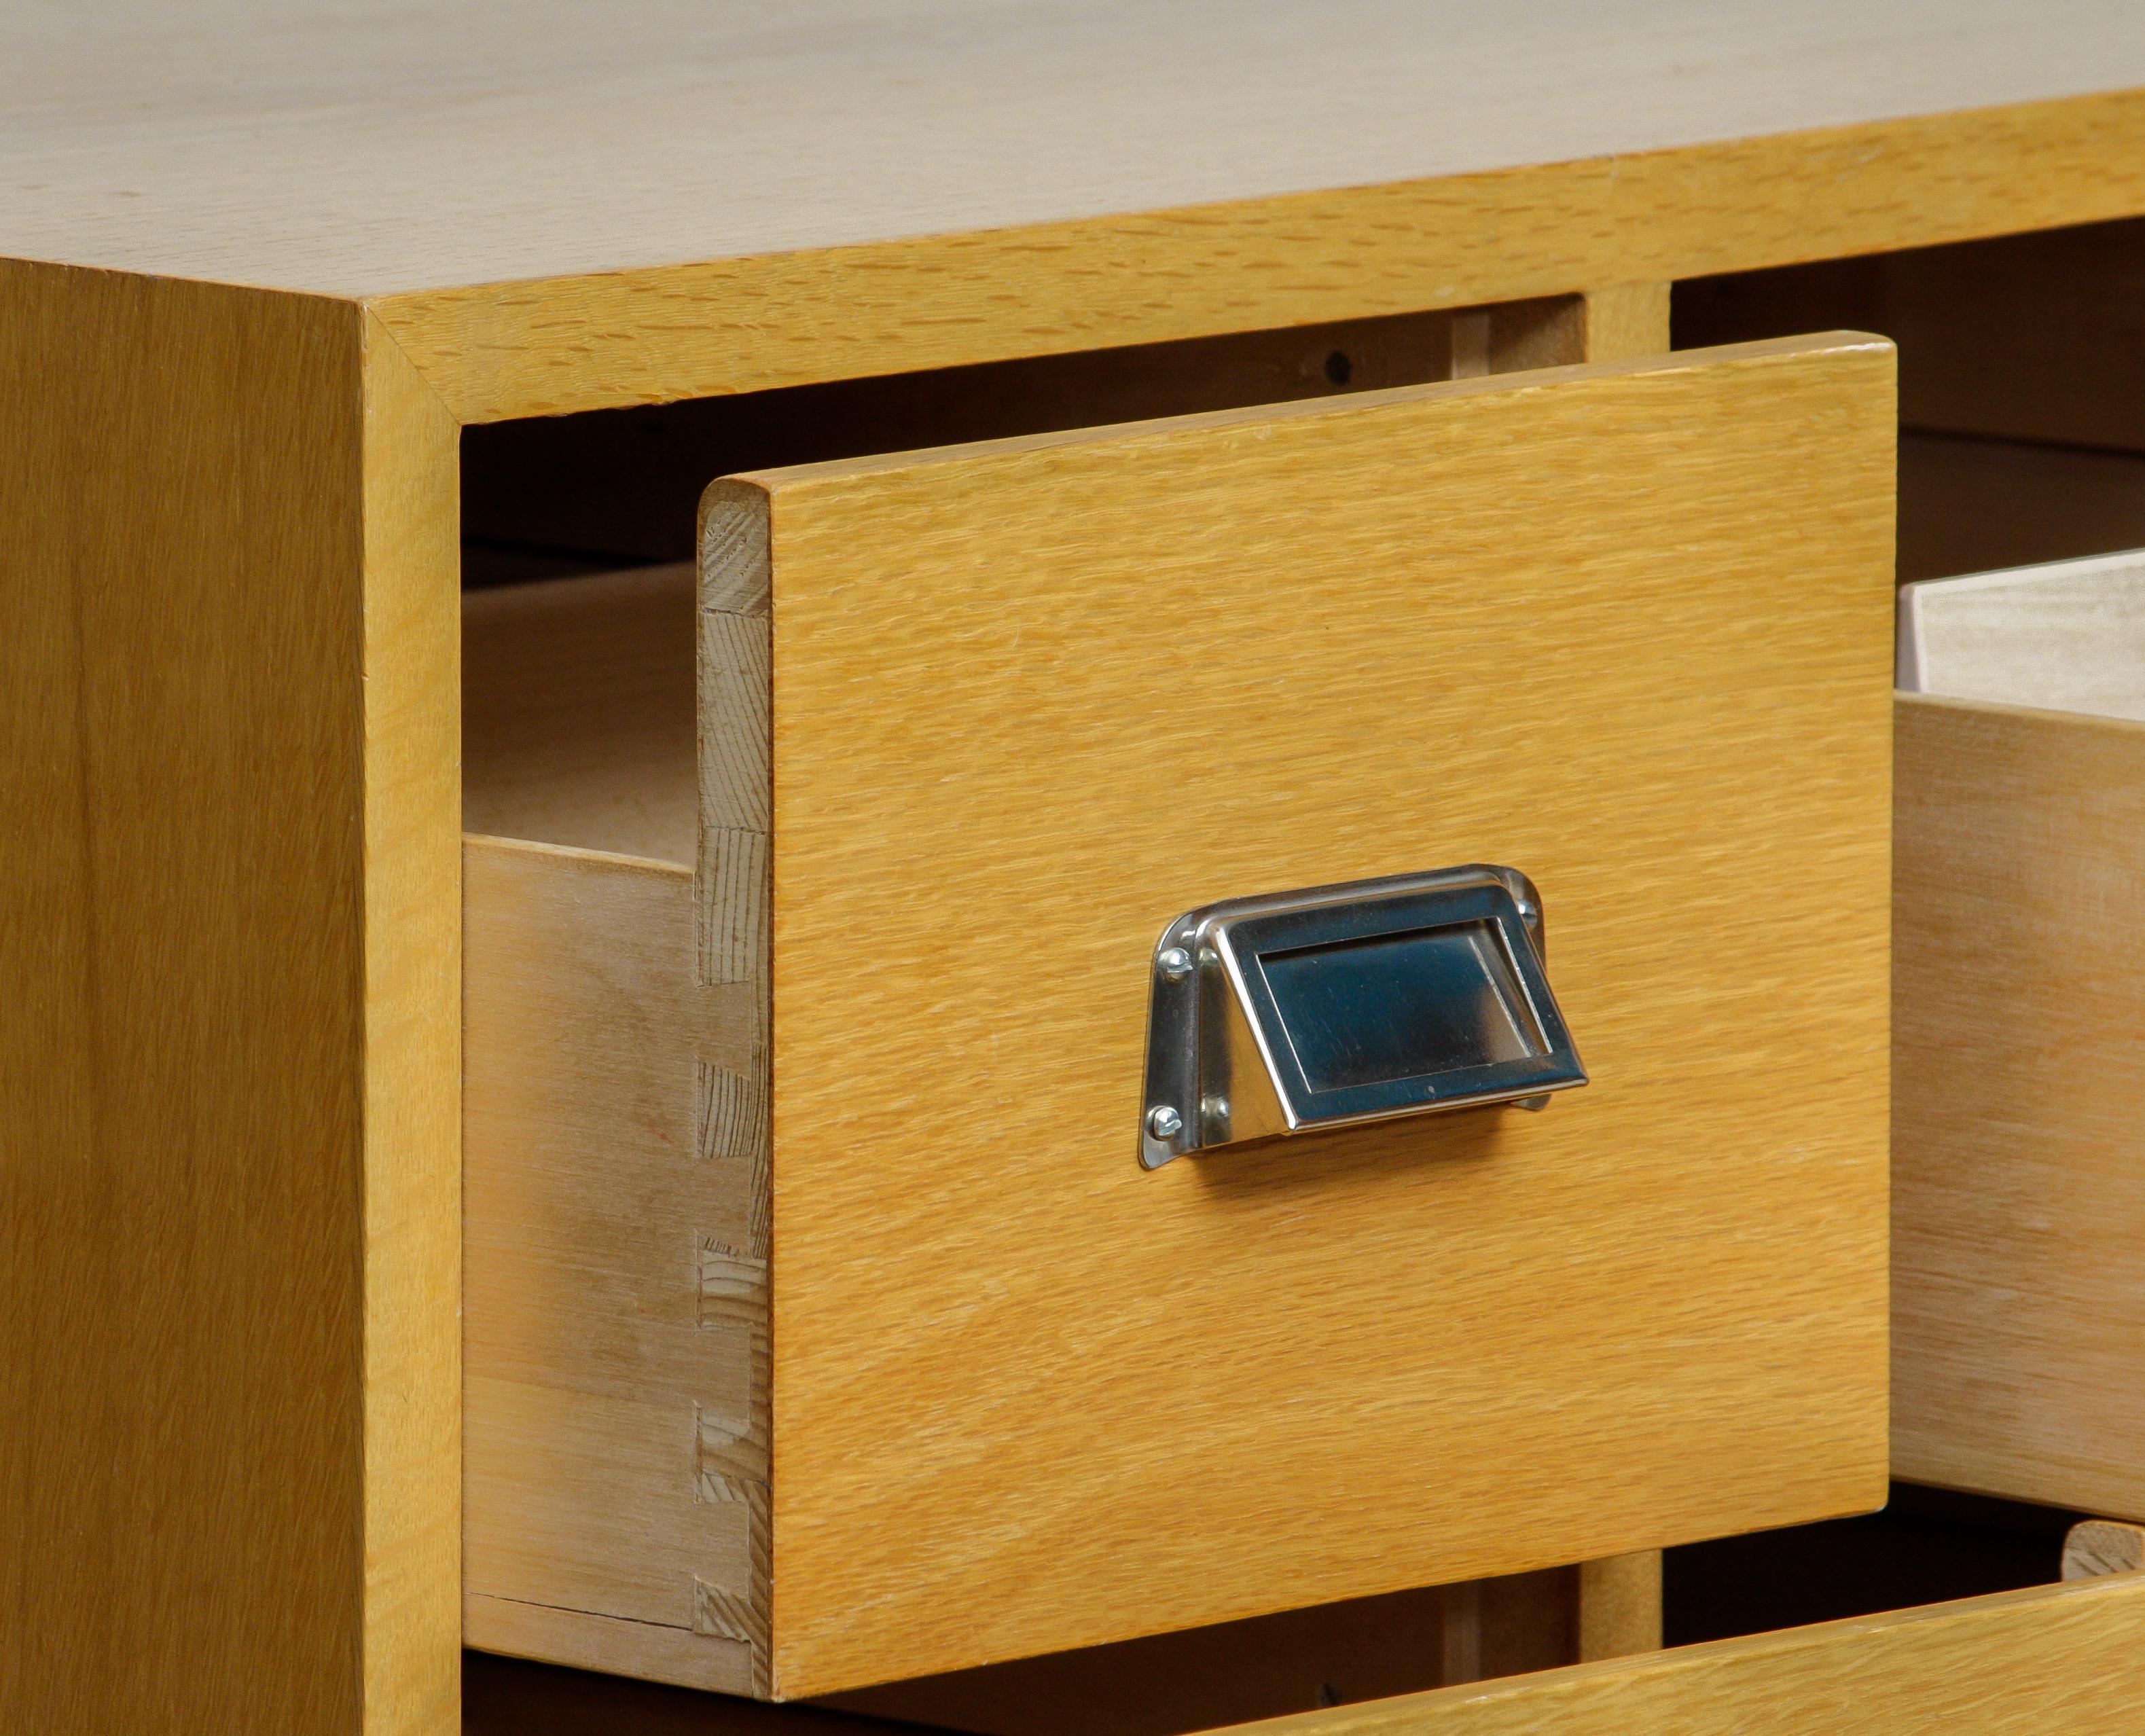 Late 20th Century 1970s, Oak Drawer Archive Cabinet in Oak and Beech by Lövgrens Traryd, Sweden